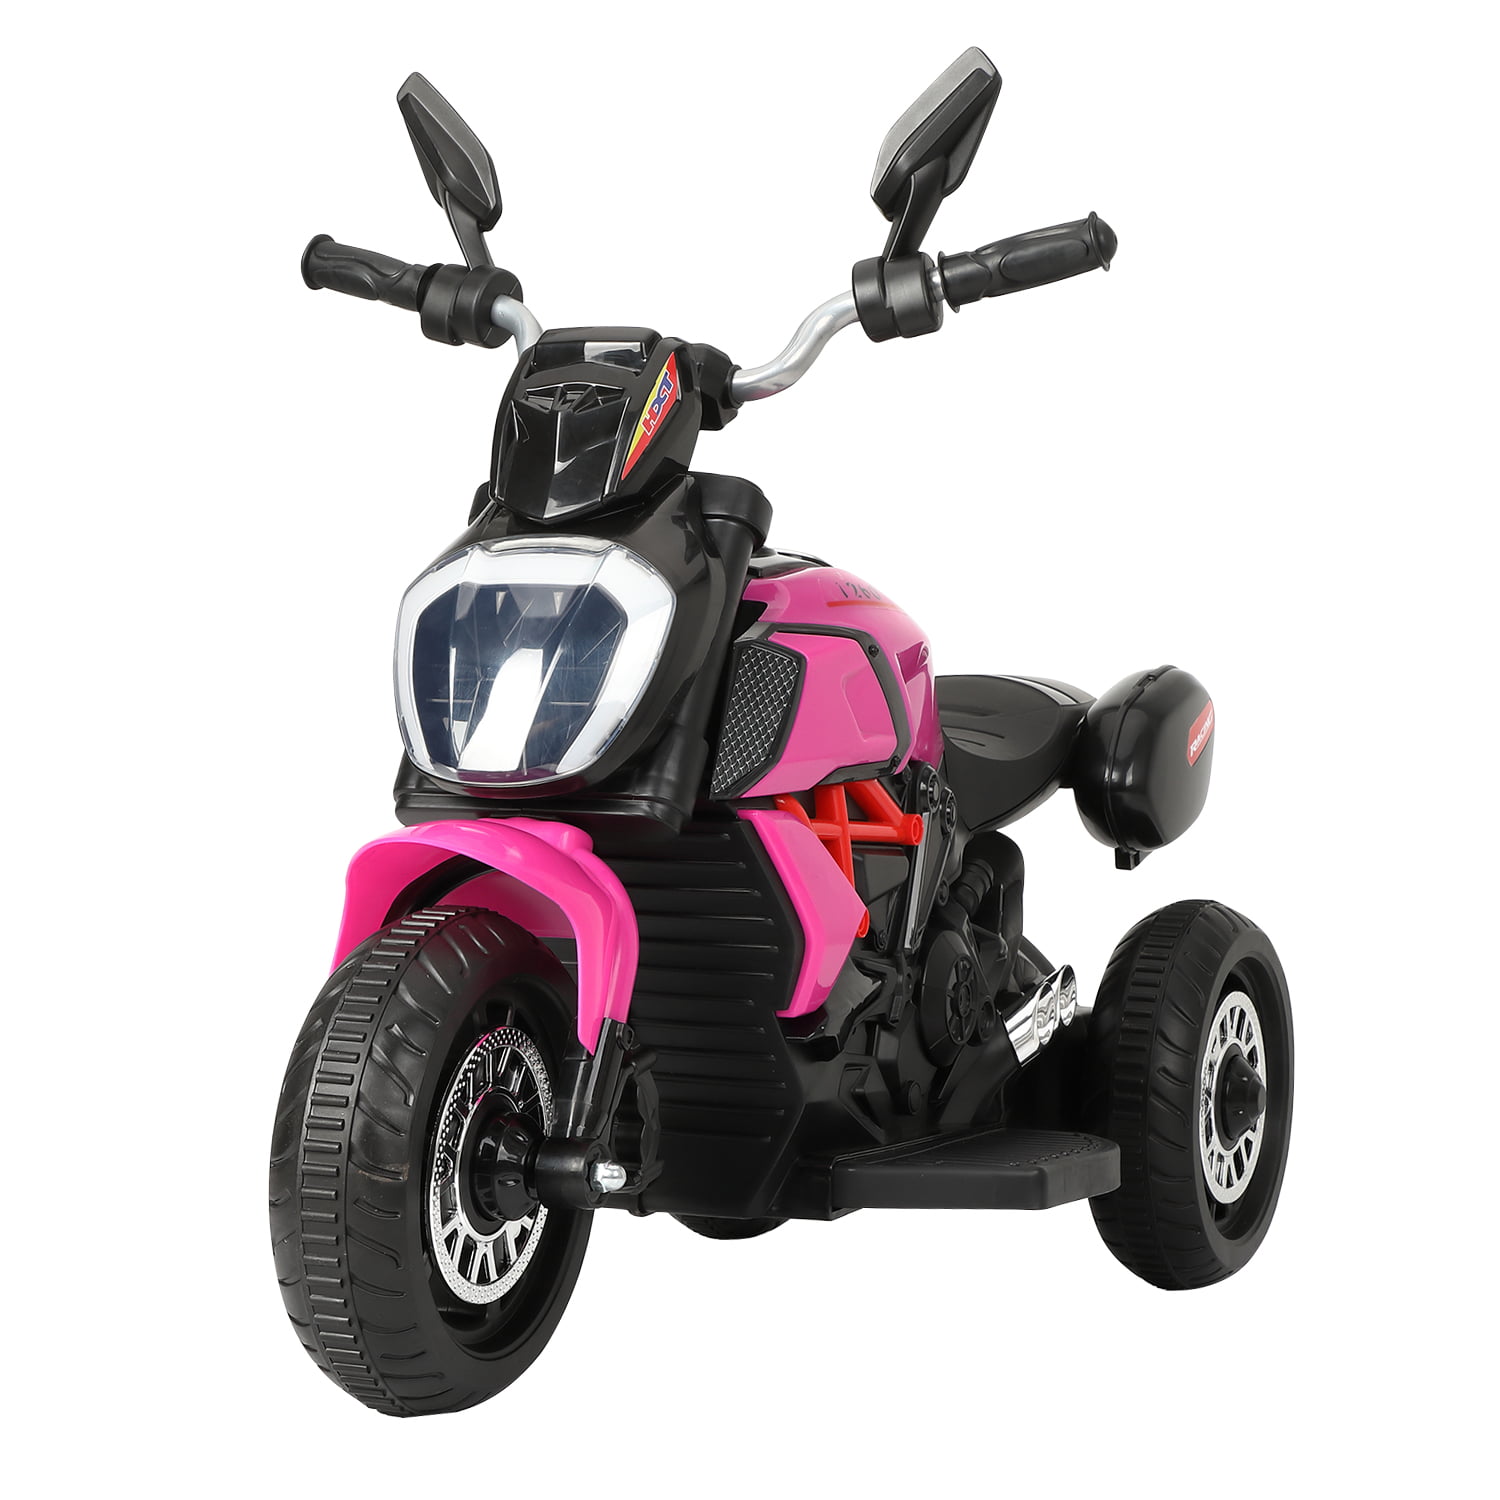 Kids Ride On Motorcycle 6V Battery Powered Electric Toy w/Training Wheel RoseRed 